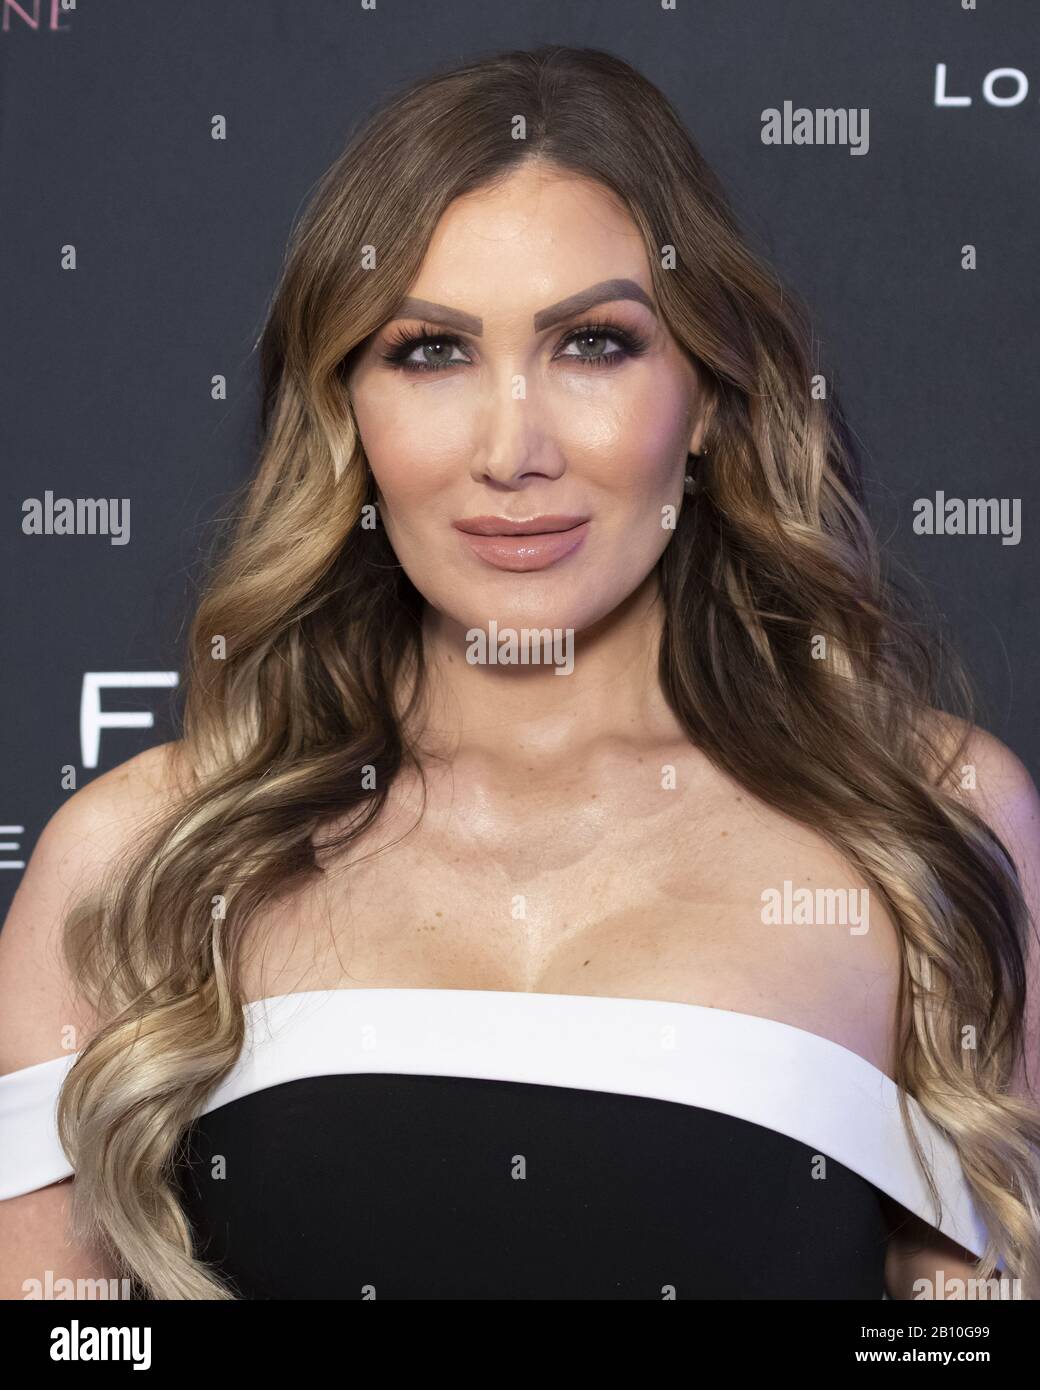 February 20, 2020, Los Angeles, California, USA: PAMELA JEAN NOBLE at REGARD Magazineâ€™s 10-Year Anniversary Celebrating Women in Film + Television Presented by HÃ©loÃ¯se Lloris Champagne and My Green Network at Sofitel at Beverly Hills in Los Angeles, California (Credit Image: © Charlie Steffens/ZUMA Wire) Stock Photo